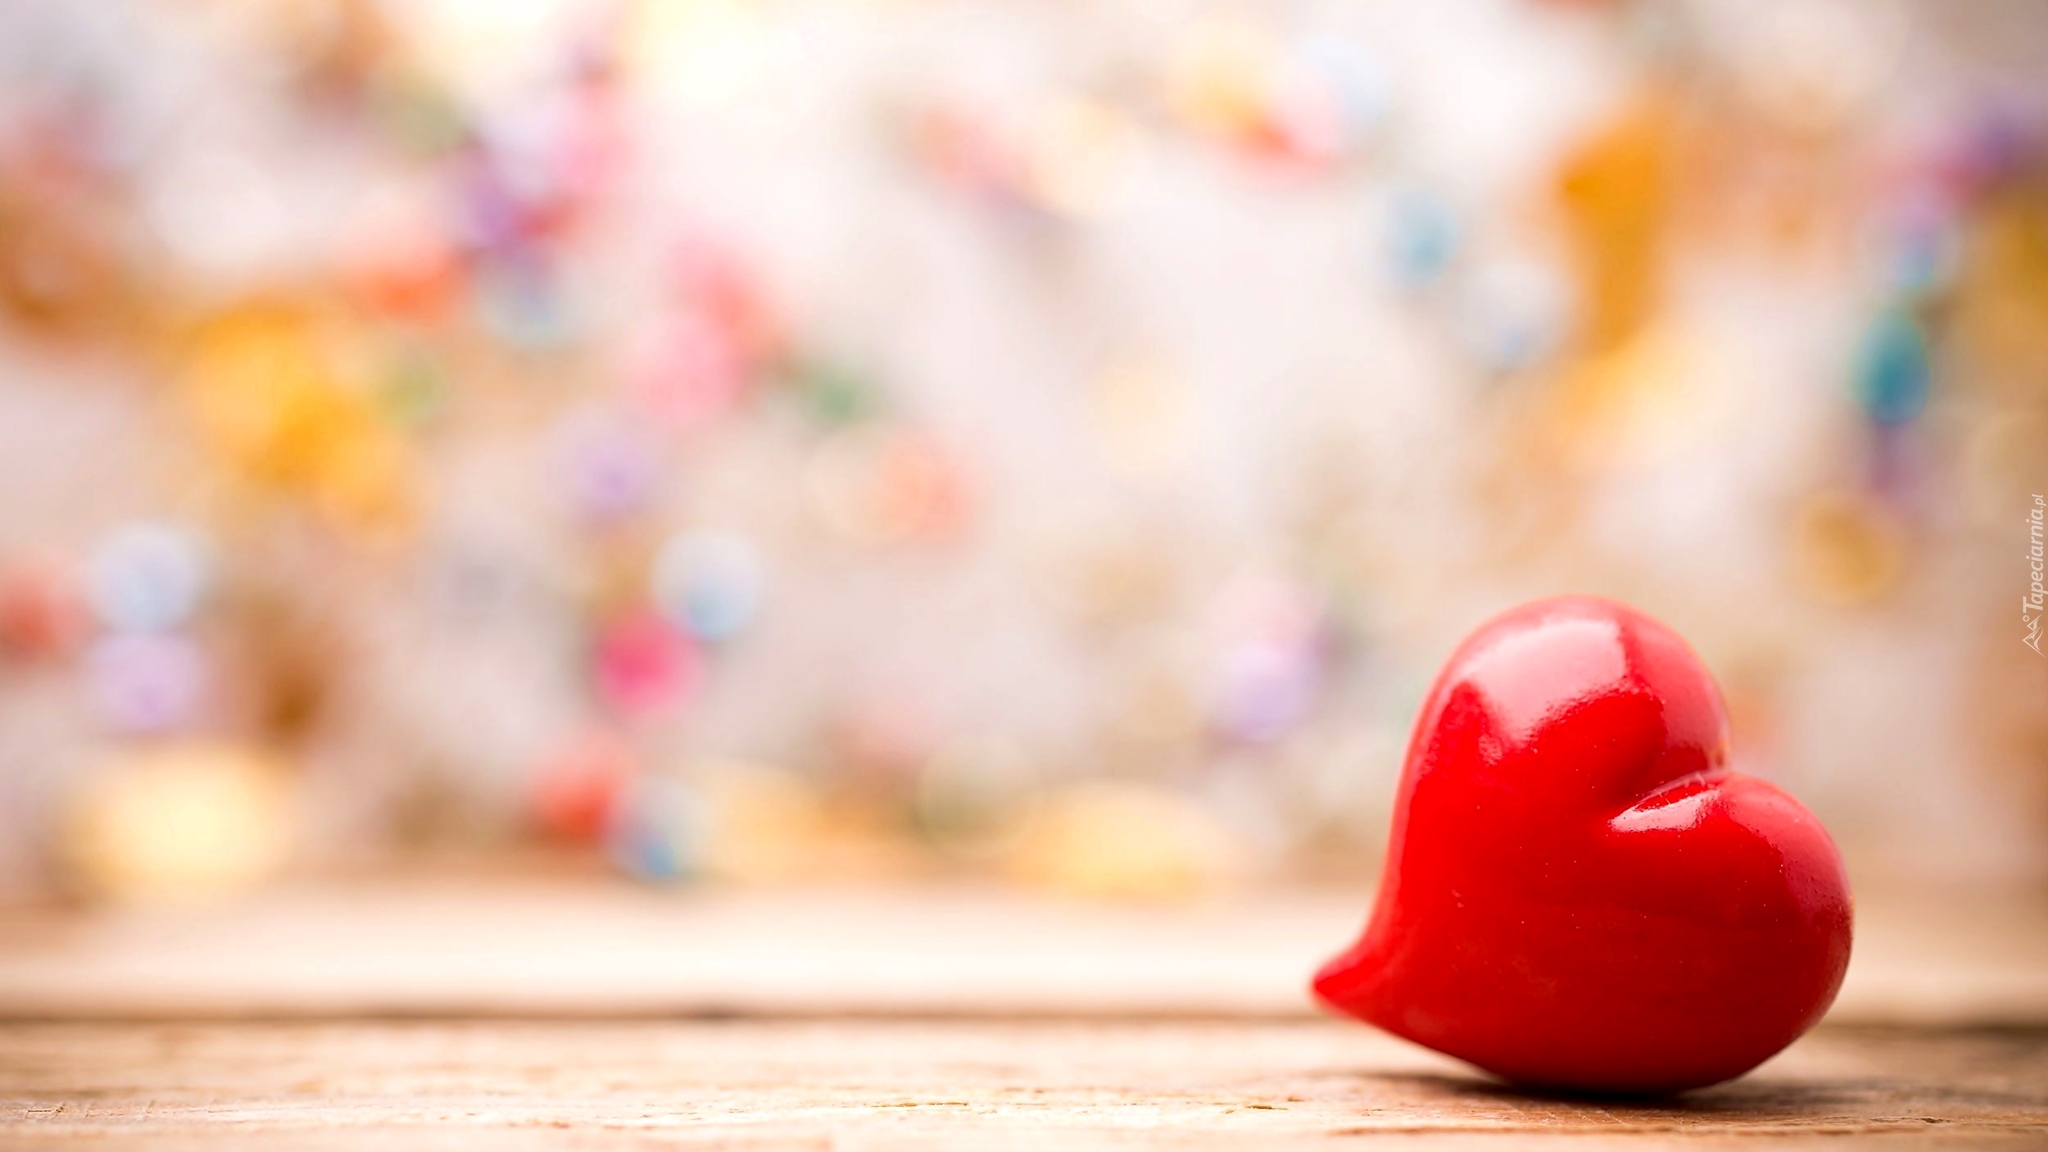 love anniversary wallpaper,red,heart,sweetness,food,still life photography